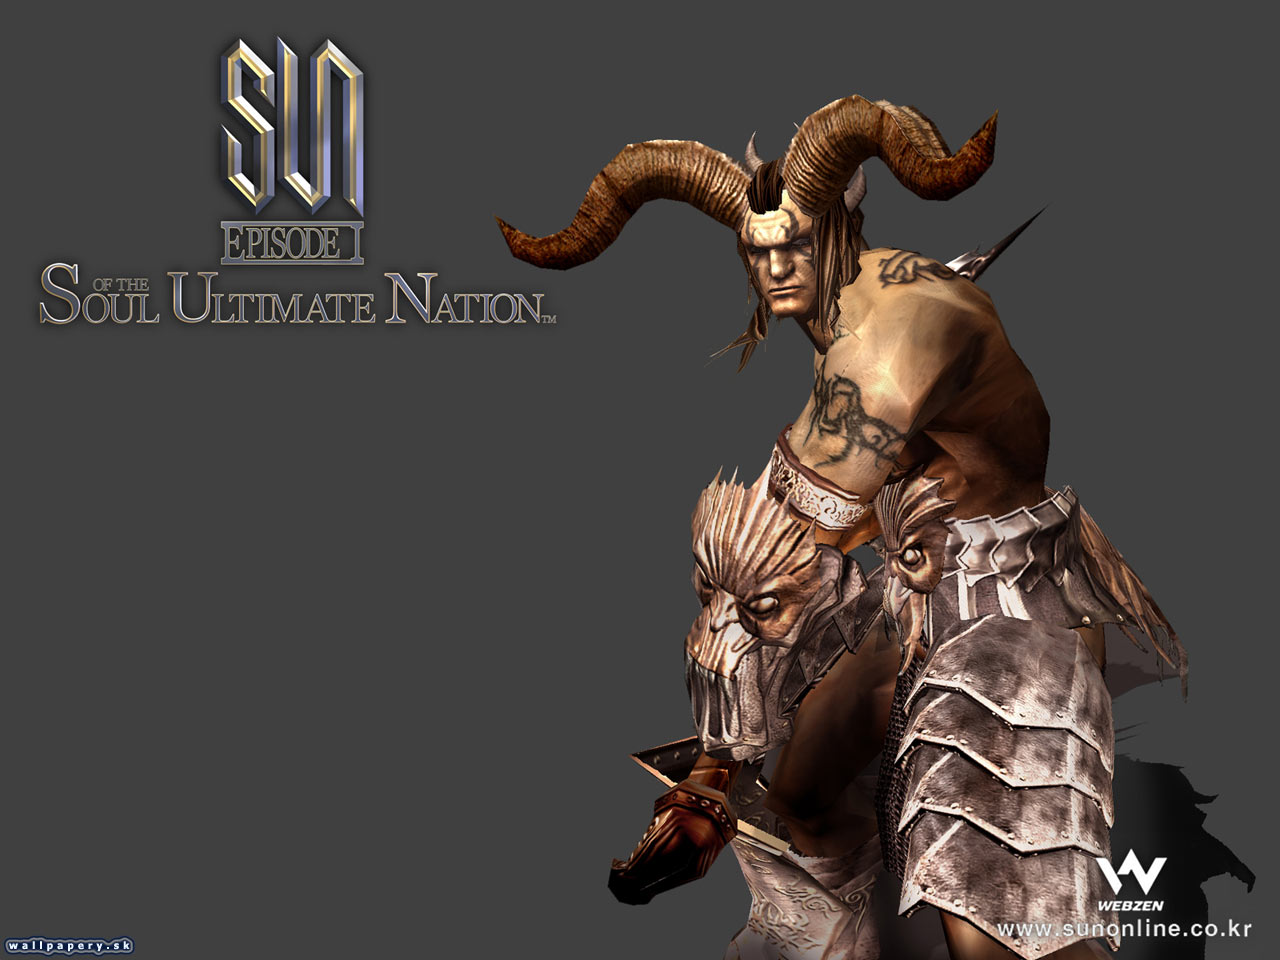 Soul of the Ultimate Nation - wallpaper 17